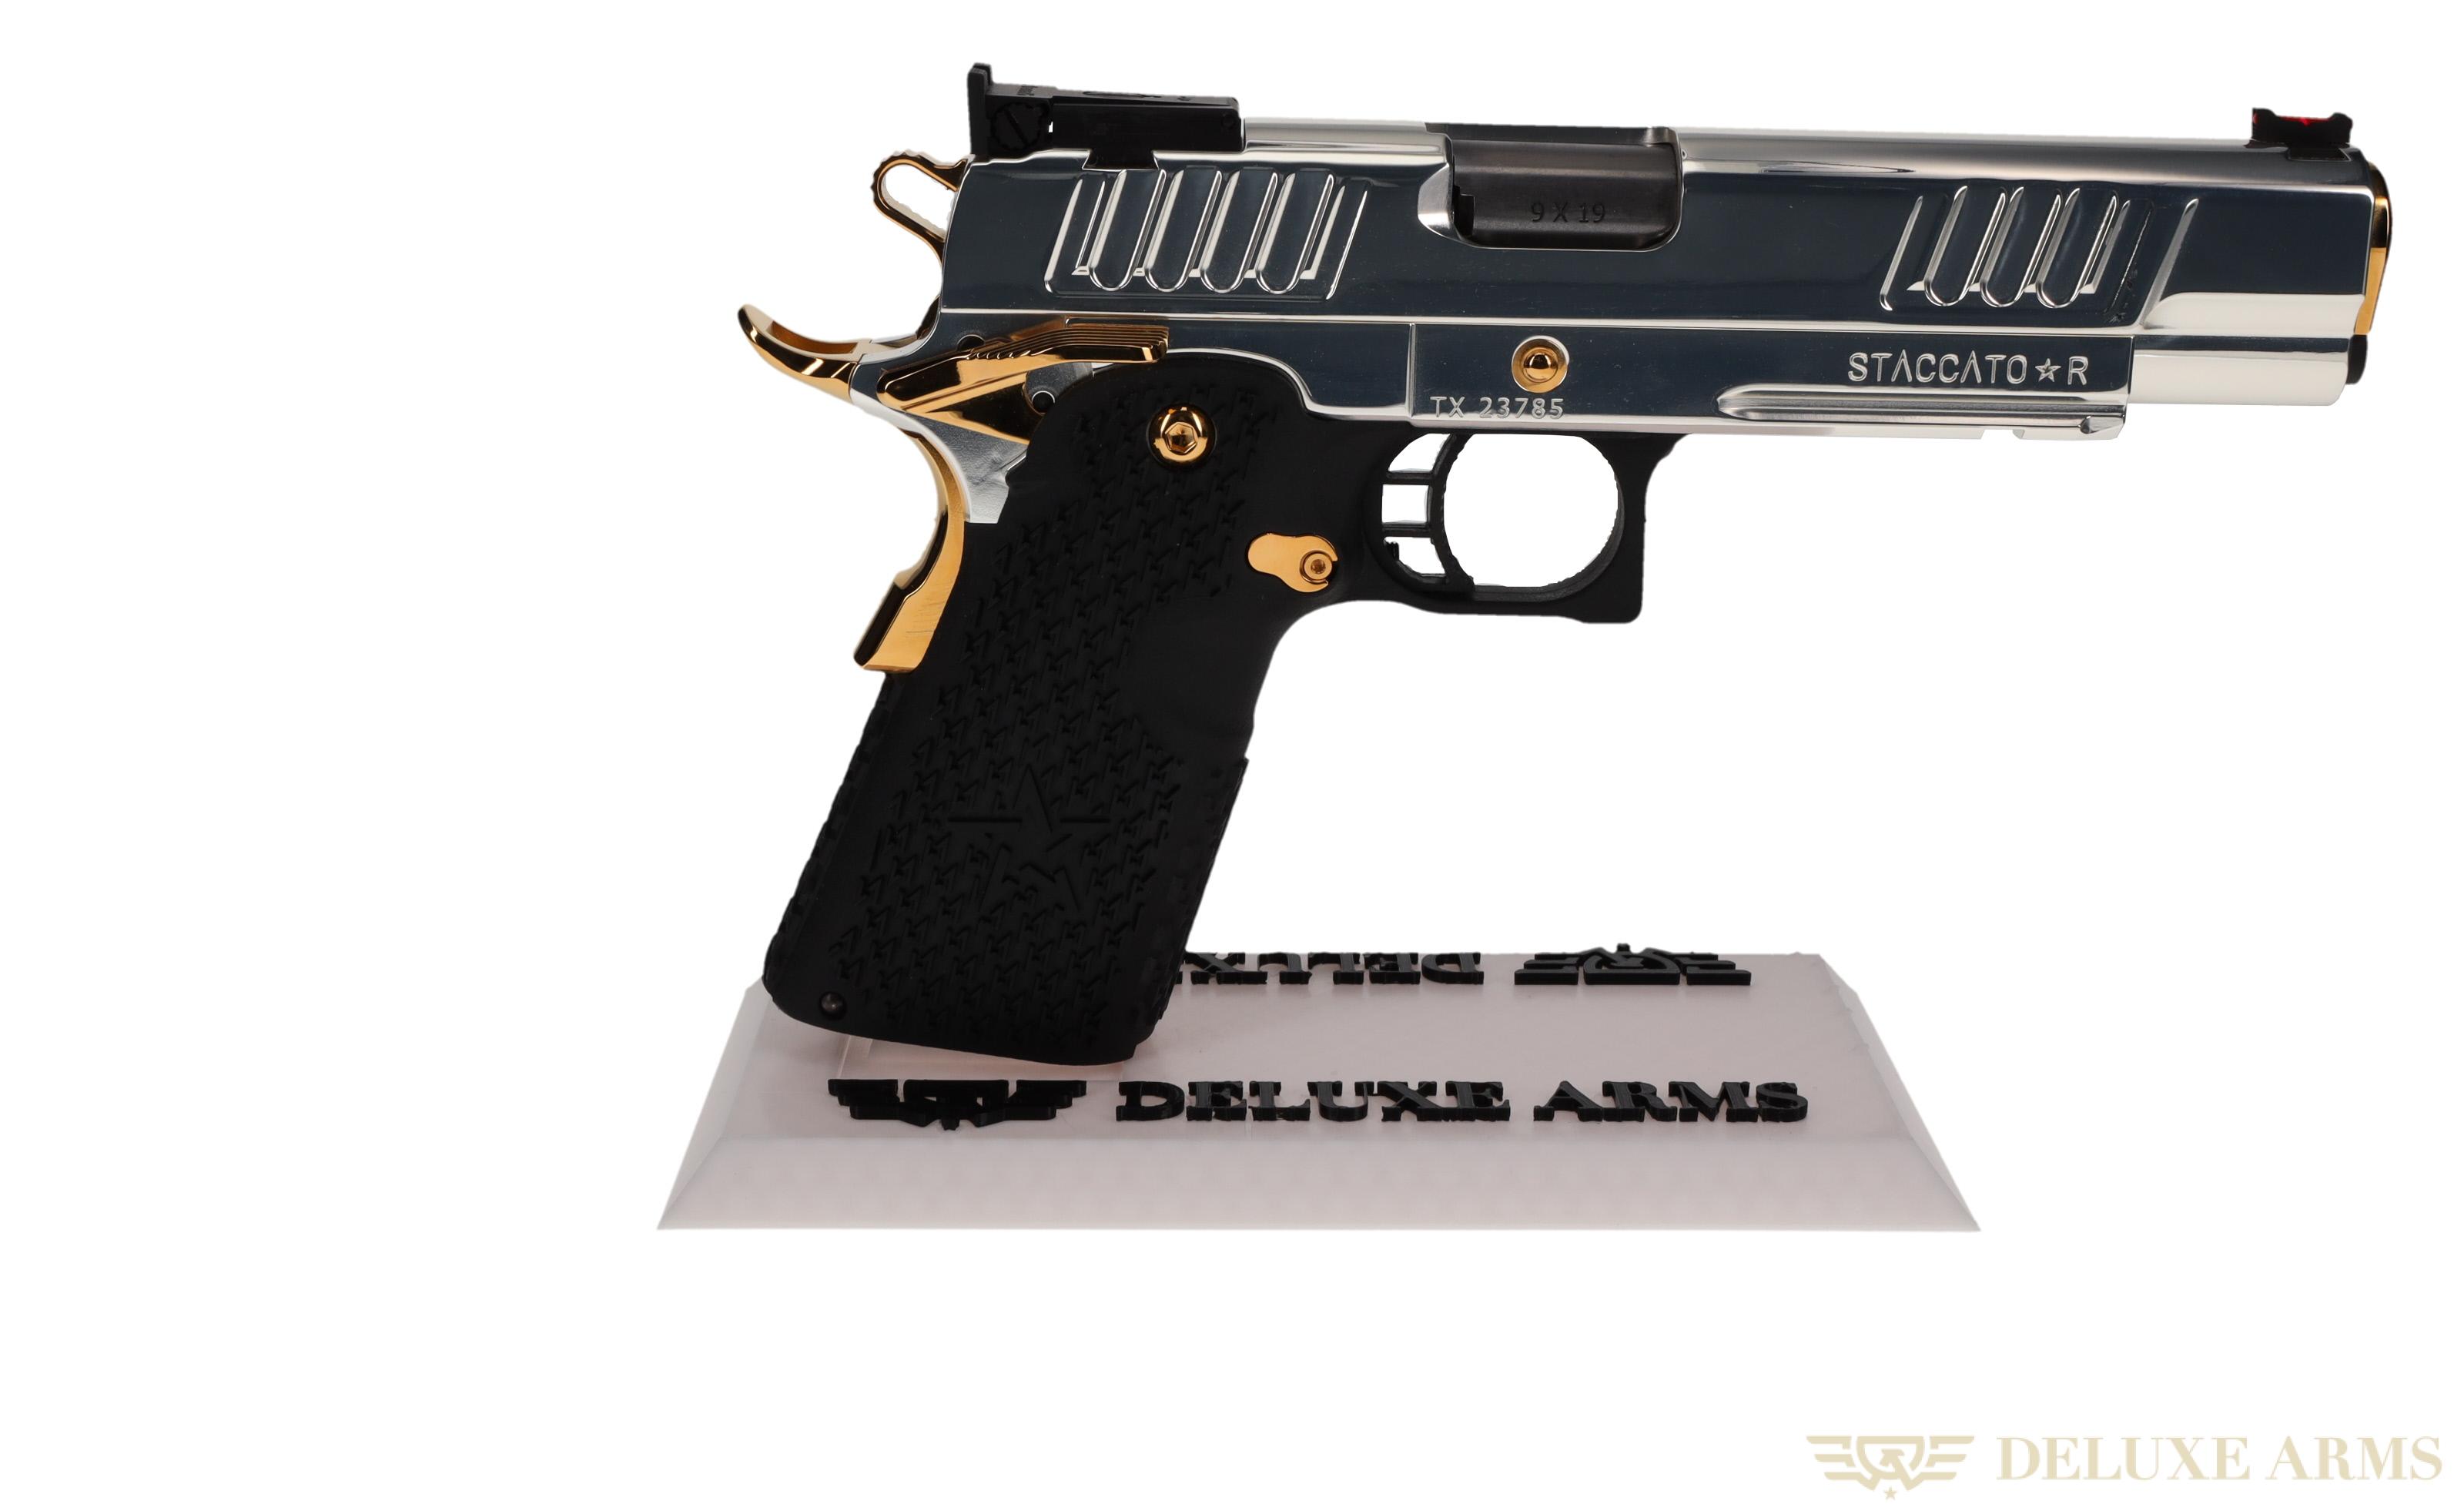 Deluxe Arms Custom R Plated 24k Gold Staccato | and Nickel